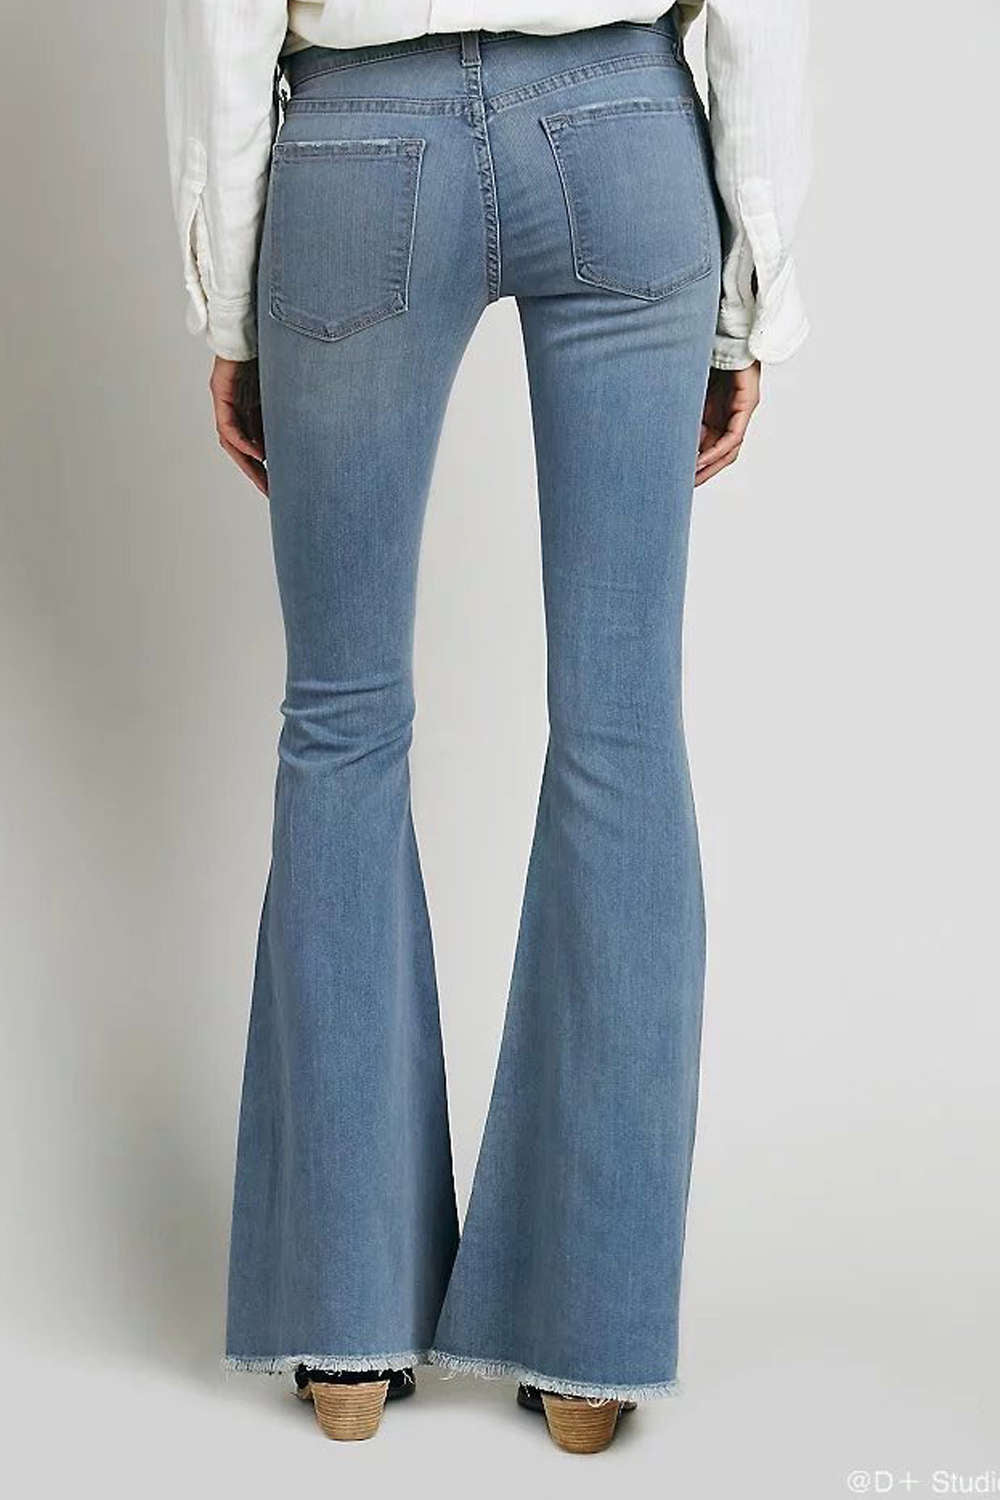 Iyasson Women's Vintage Flare Jeans